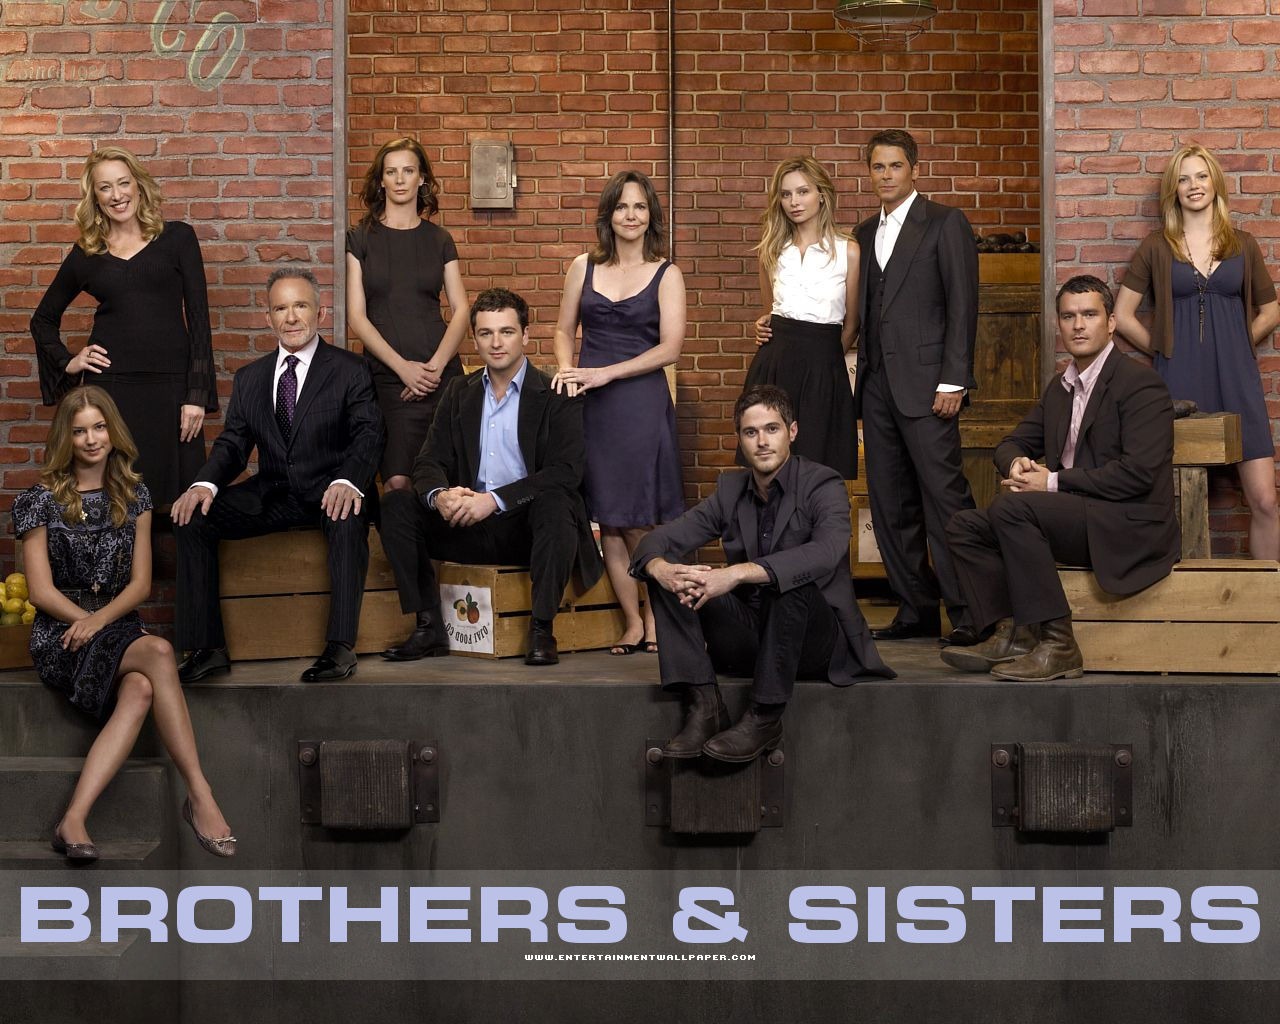 Brothers & Sisters 兄弟姐妹 #22 - 1280x1024